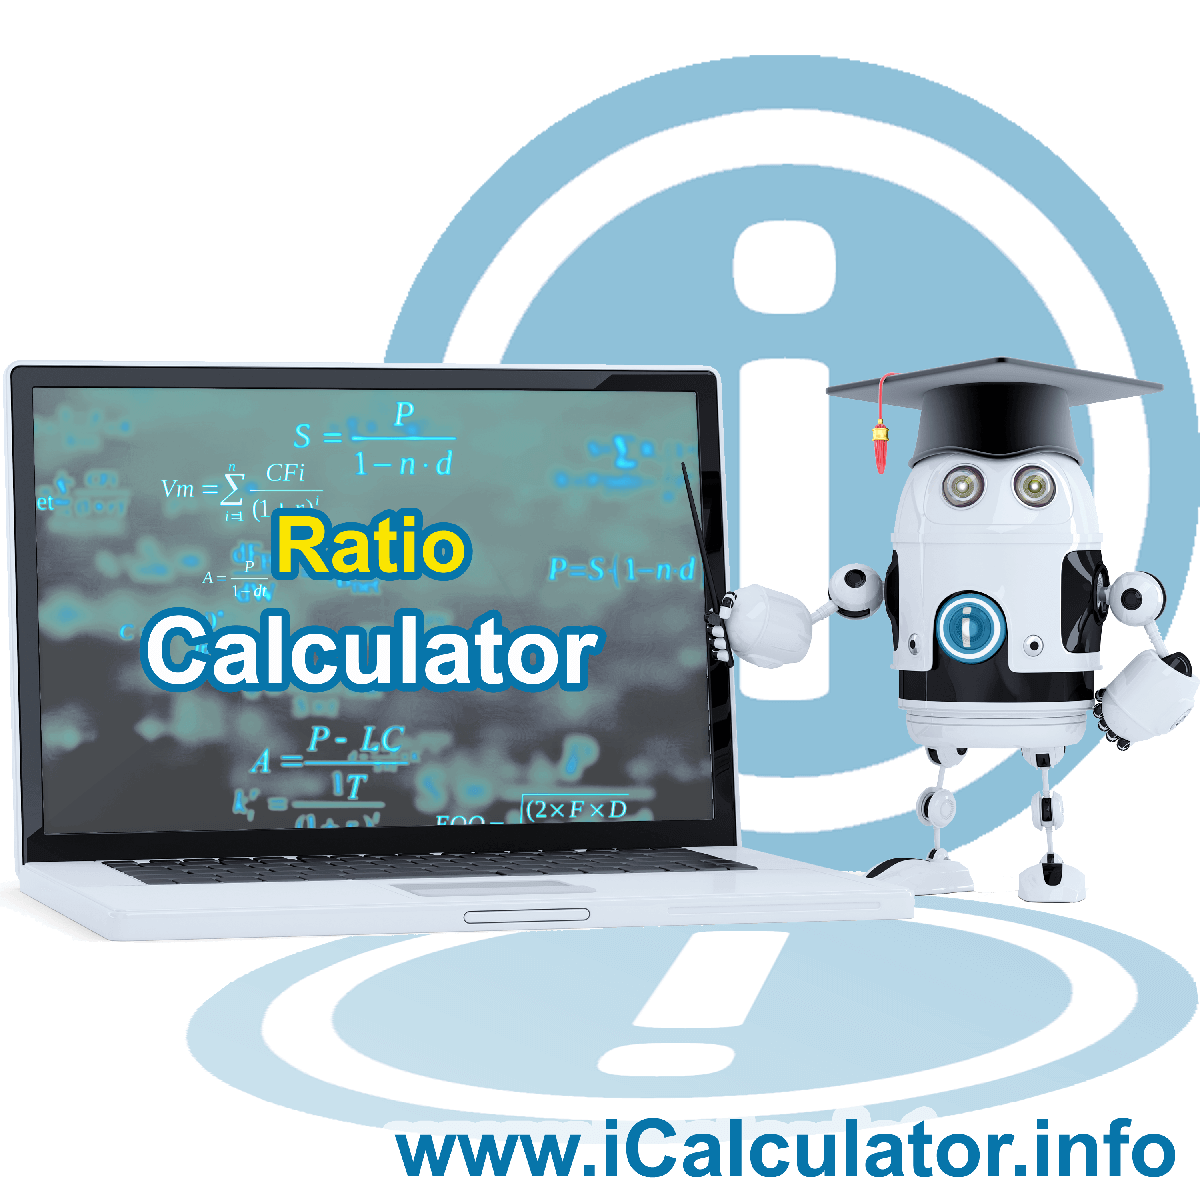 Ratio Calculator: This image show the calculator robot pointing to a screen with the formula for calculating ratios manually using ratio formulas.